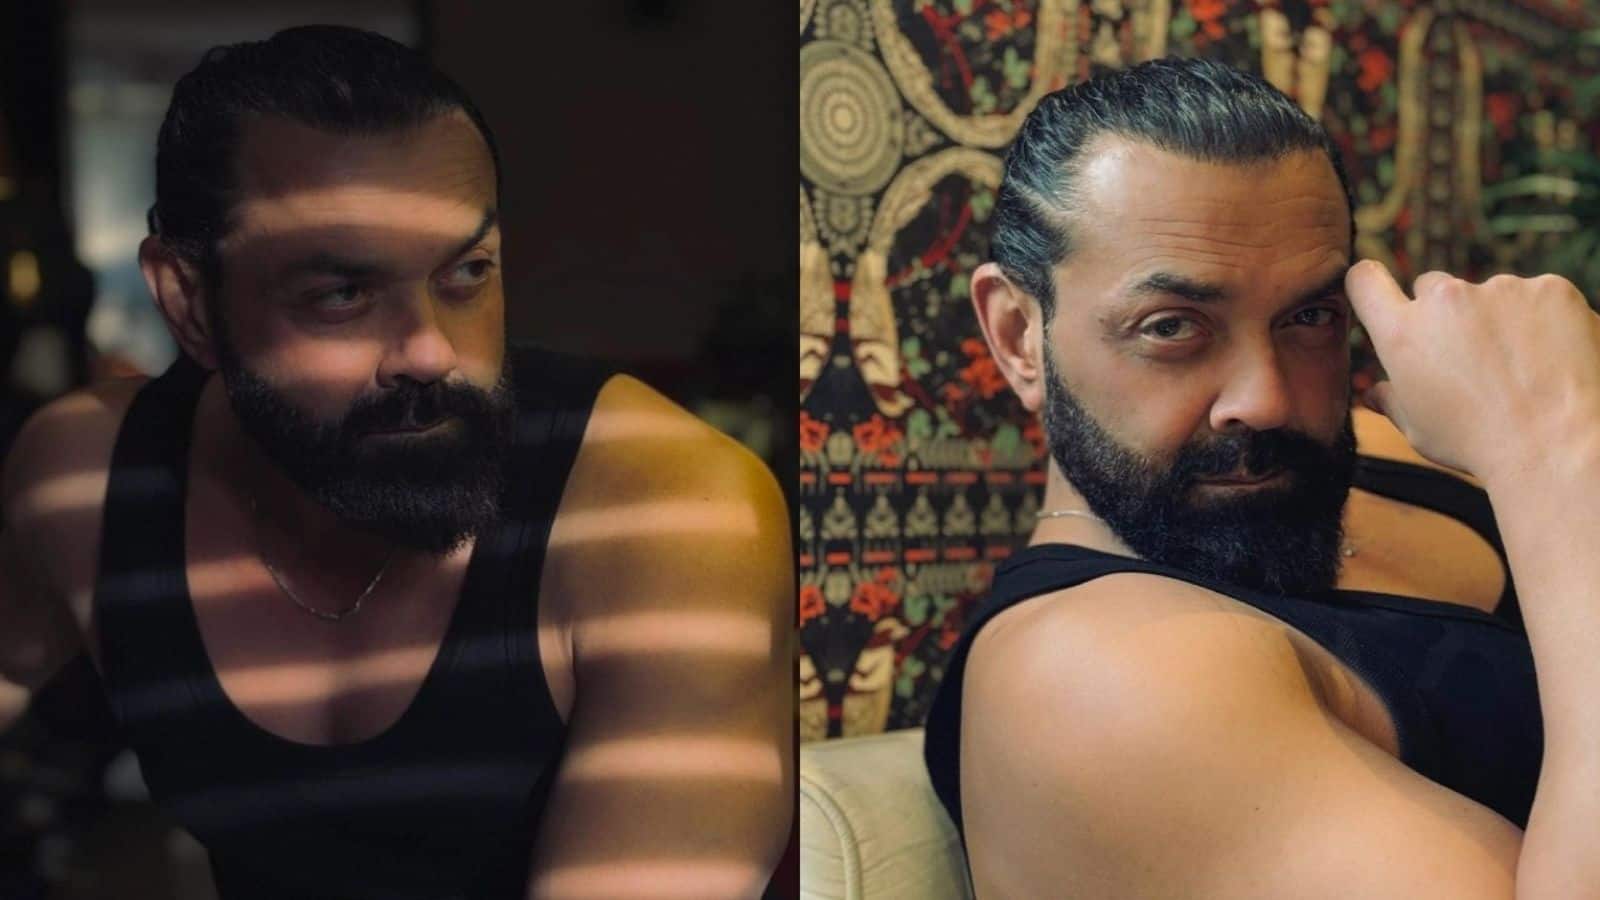 Bobby Deol channelizes 'Animal's Abrar in recent photos; check here